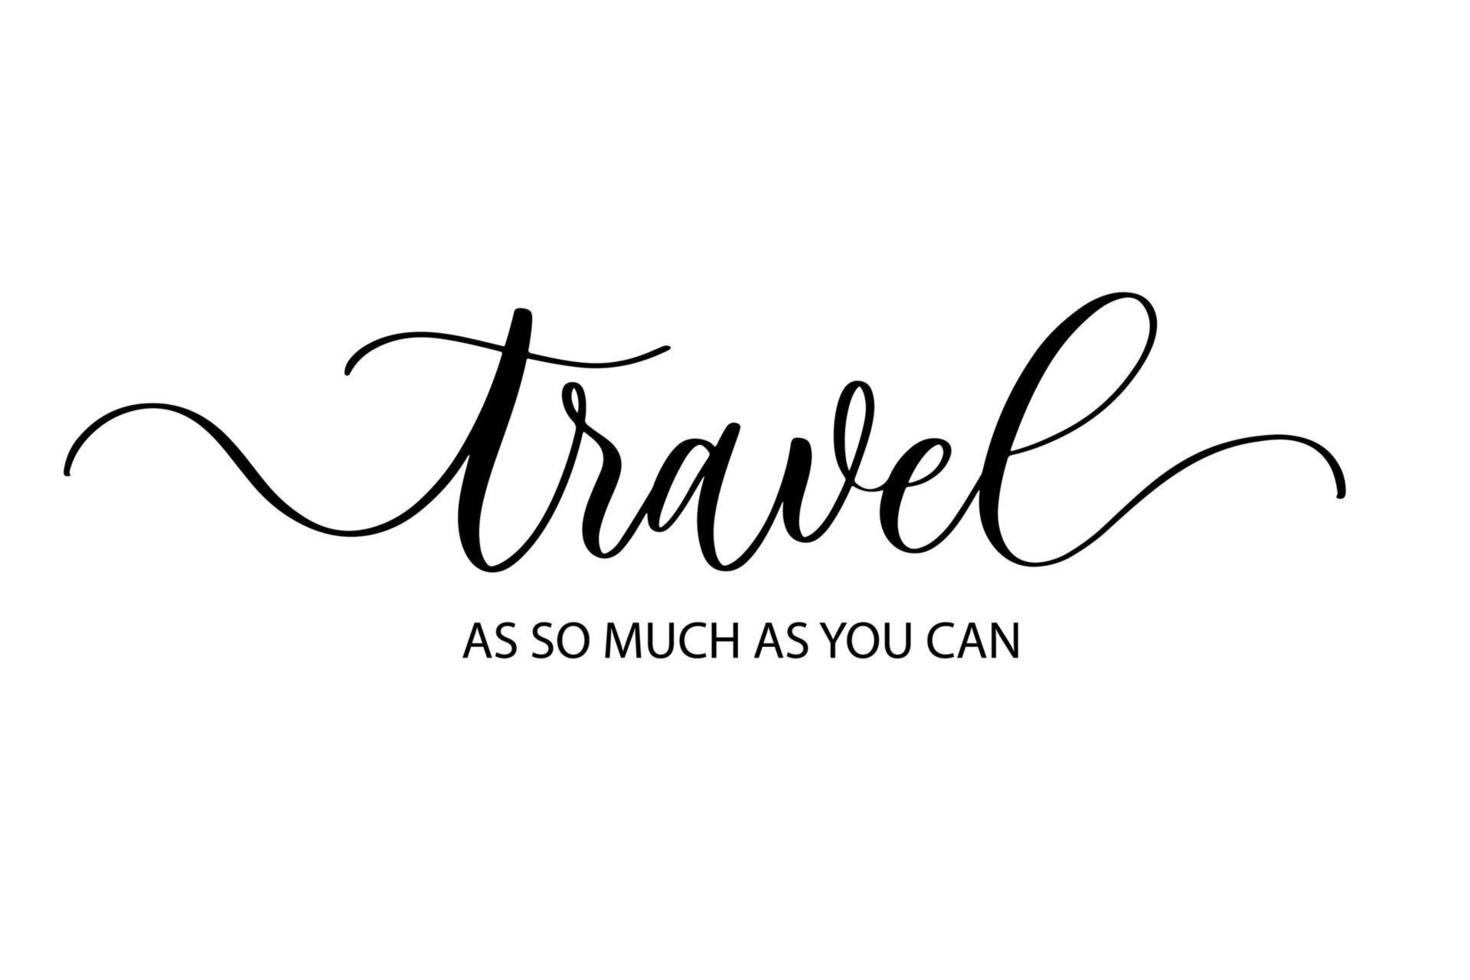 Travel as so much as you can - Cute hand drawn nursery poster with lettering in scandinavian style. vector